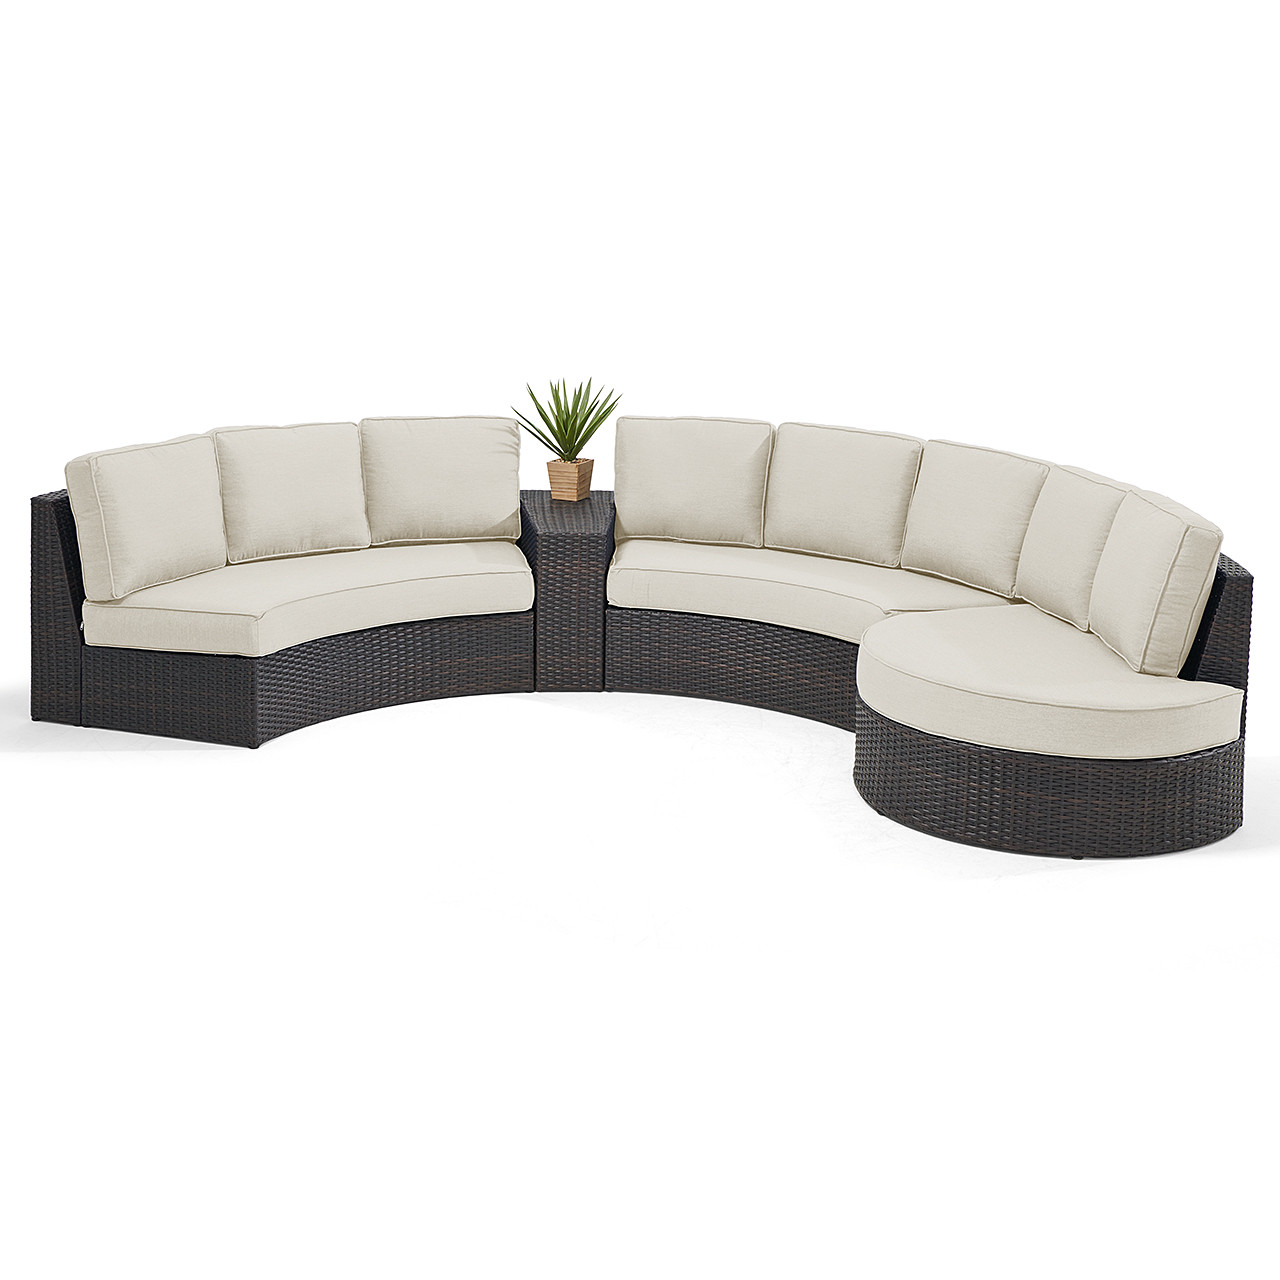 San Lucas Outdoor Wicker with Cushions 4 Piece Contour Sectional + Right Cuddle Bed